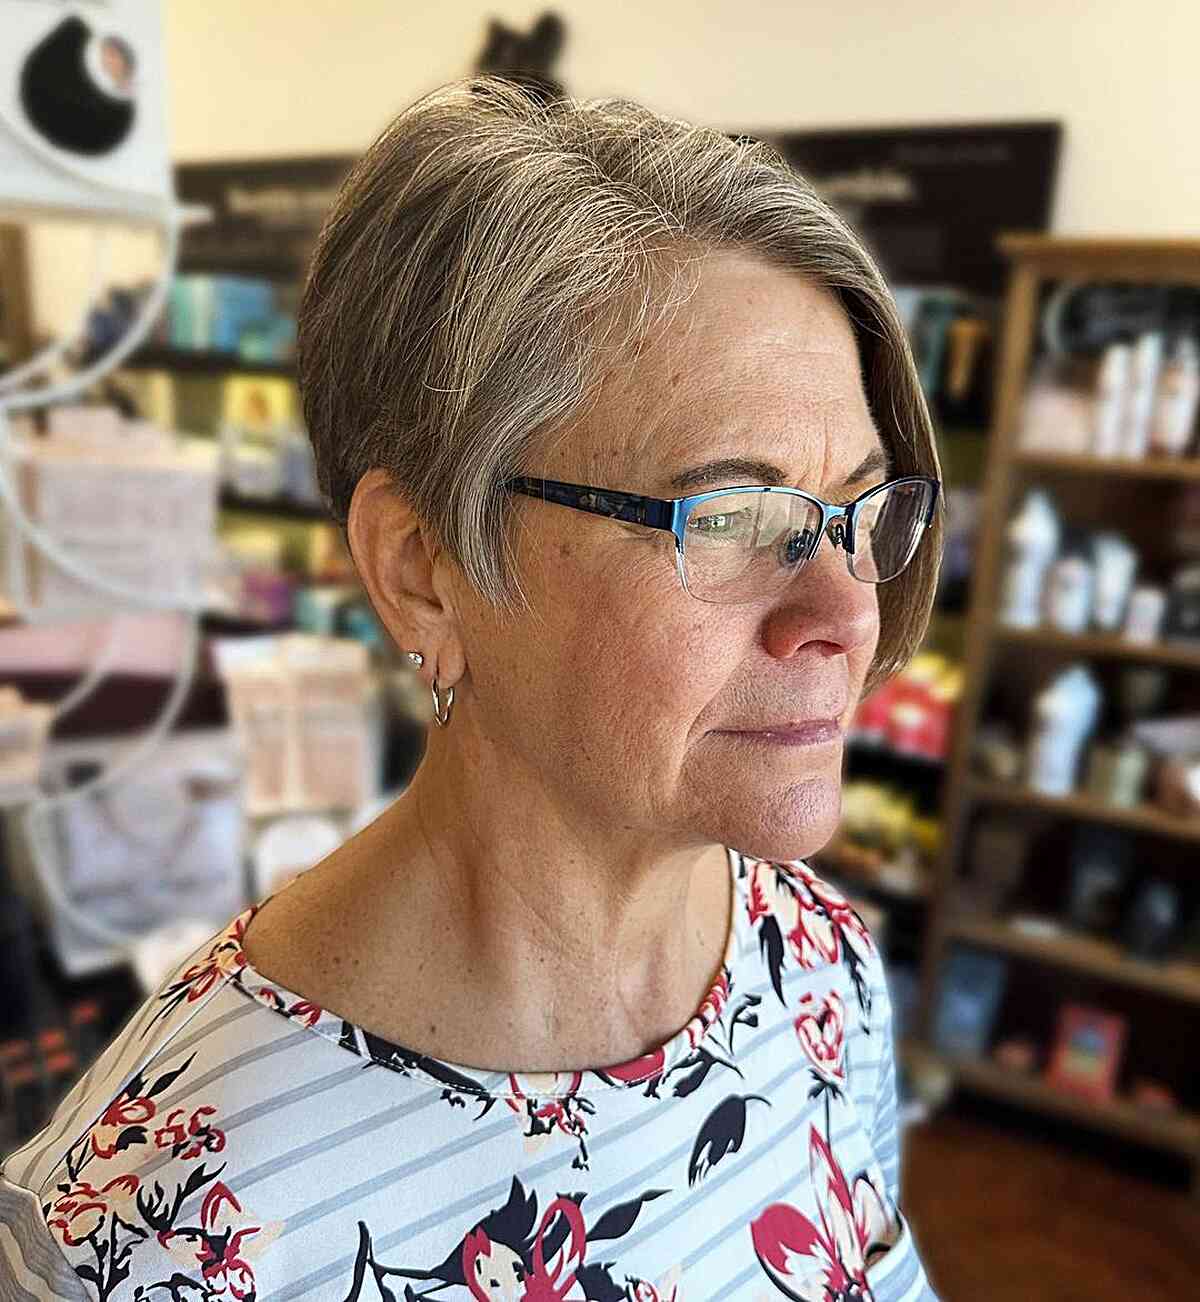 Very Short Asymmetrical Haircut for women aged 60 with reading glasses